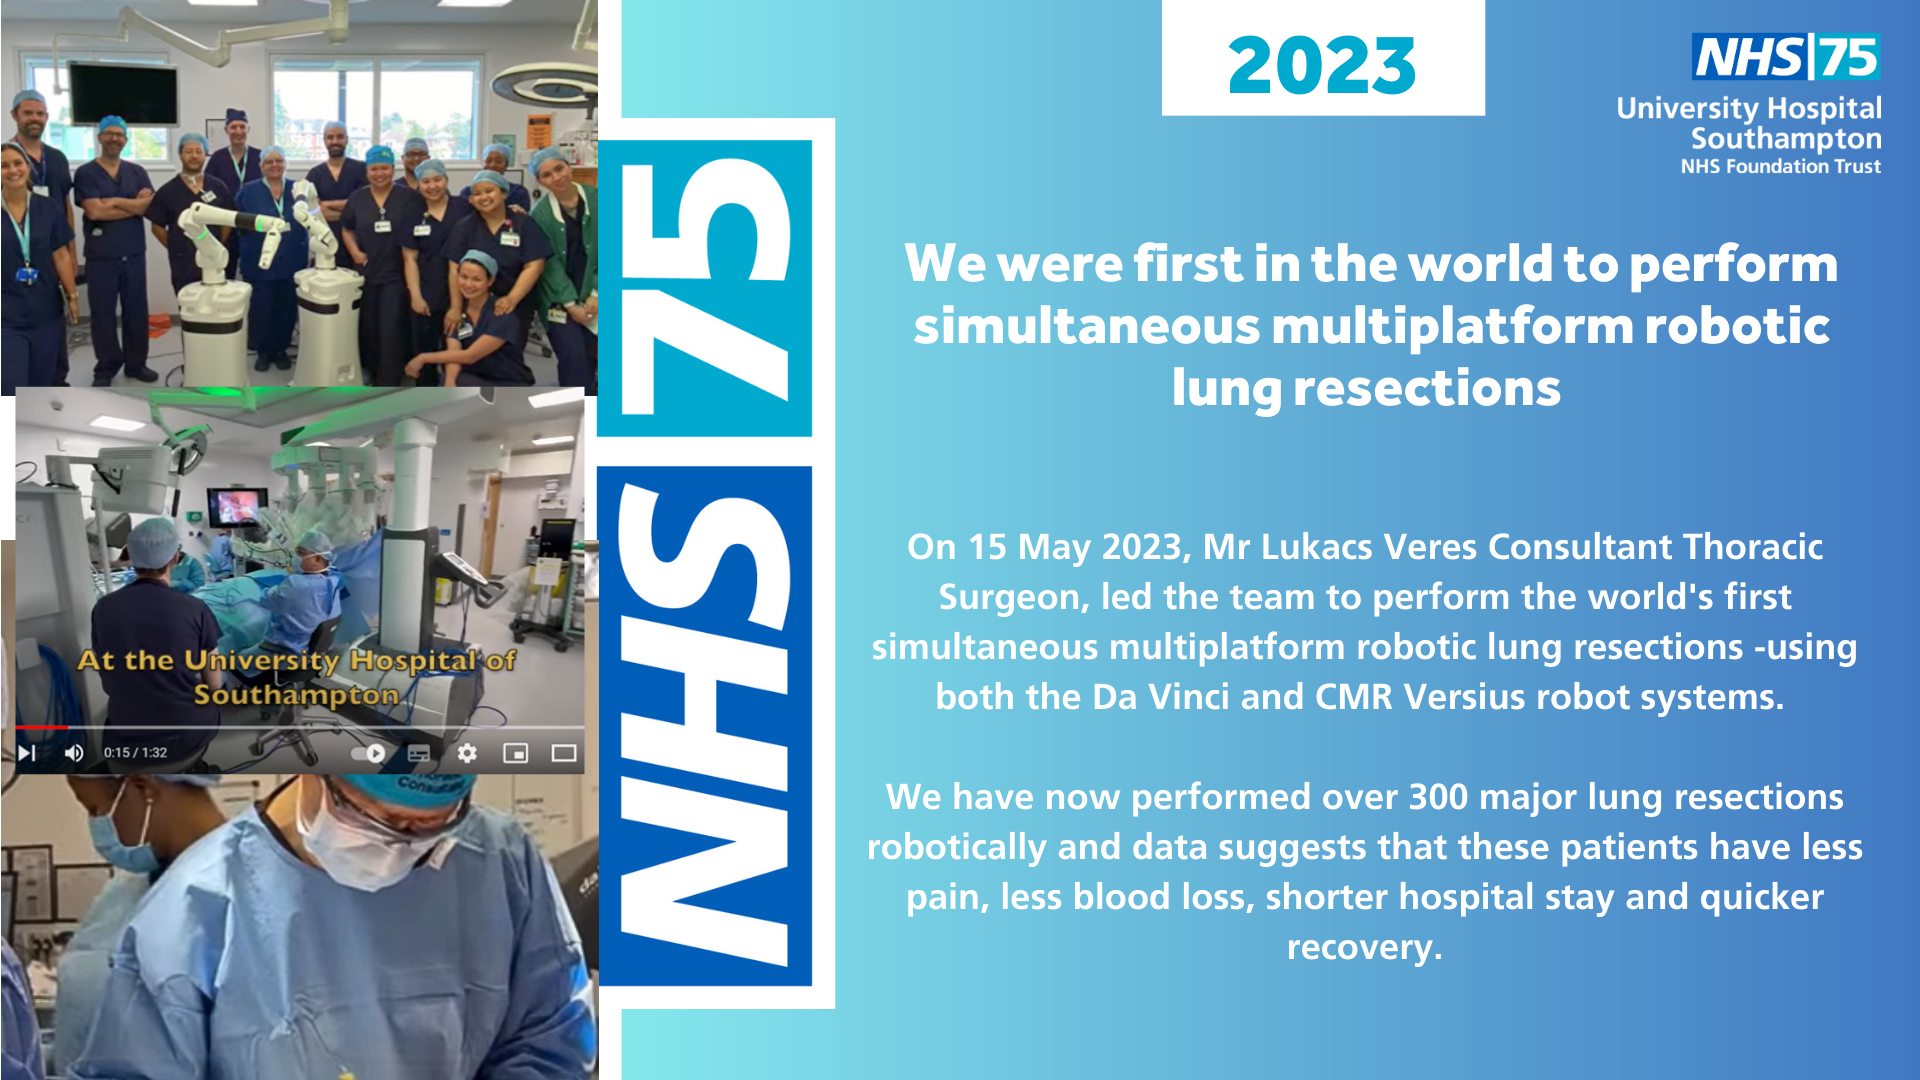 We were first in the world to perform simultaneous multiplatform robotic lung resections